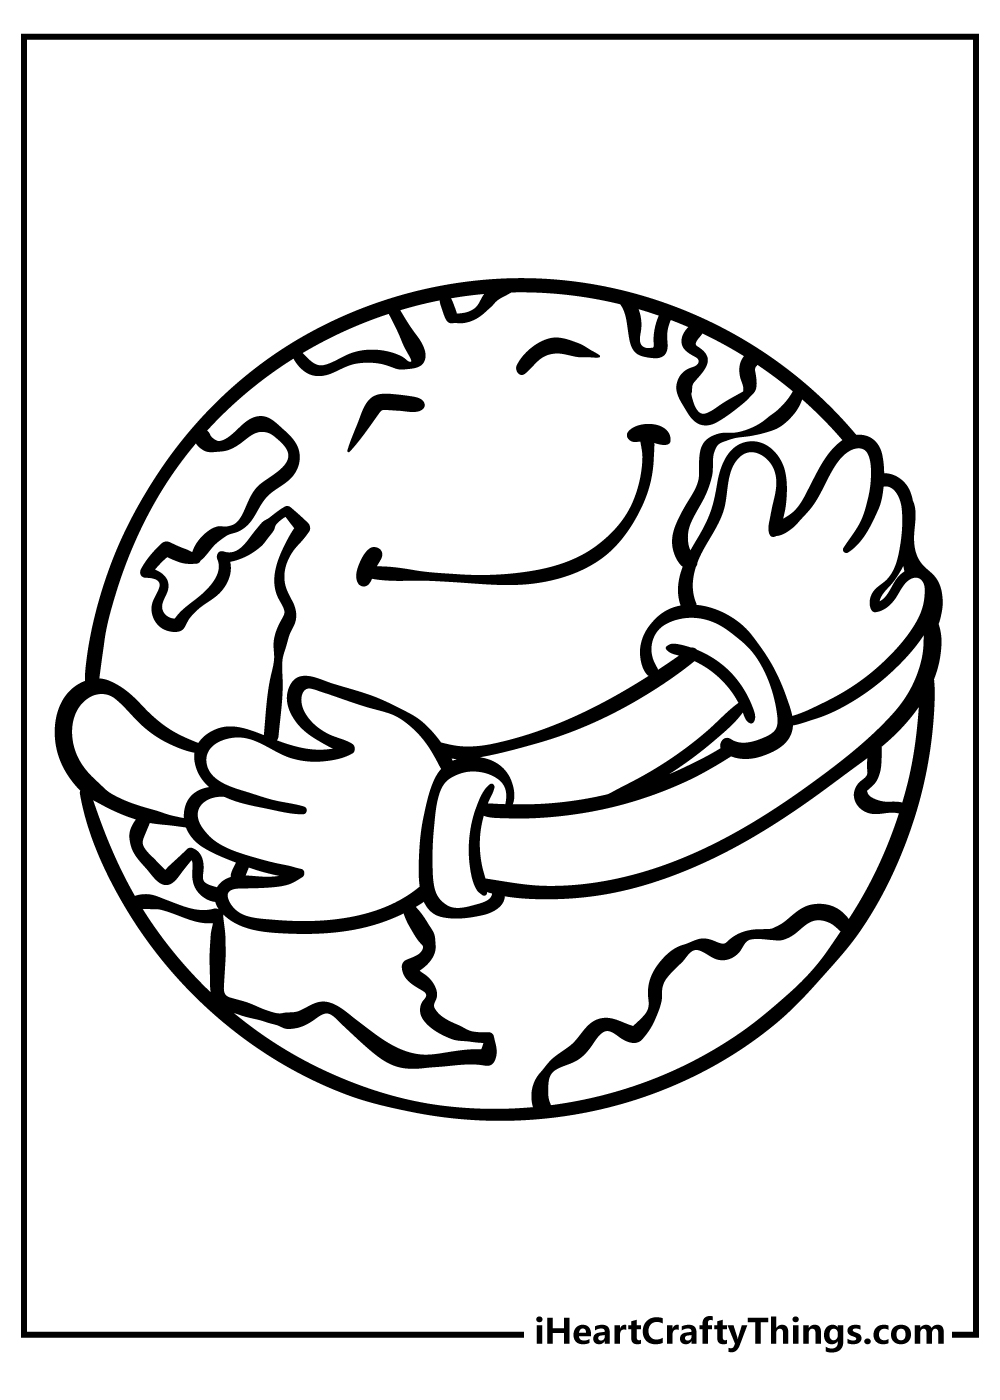 Printable Earth Coloring Pages Updated 20